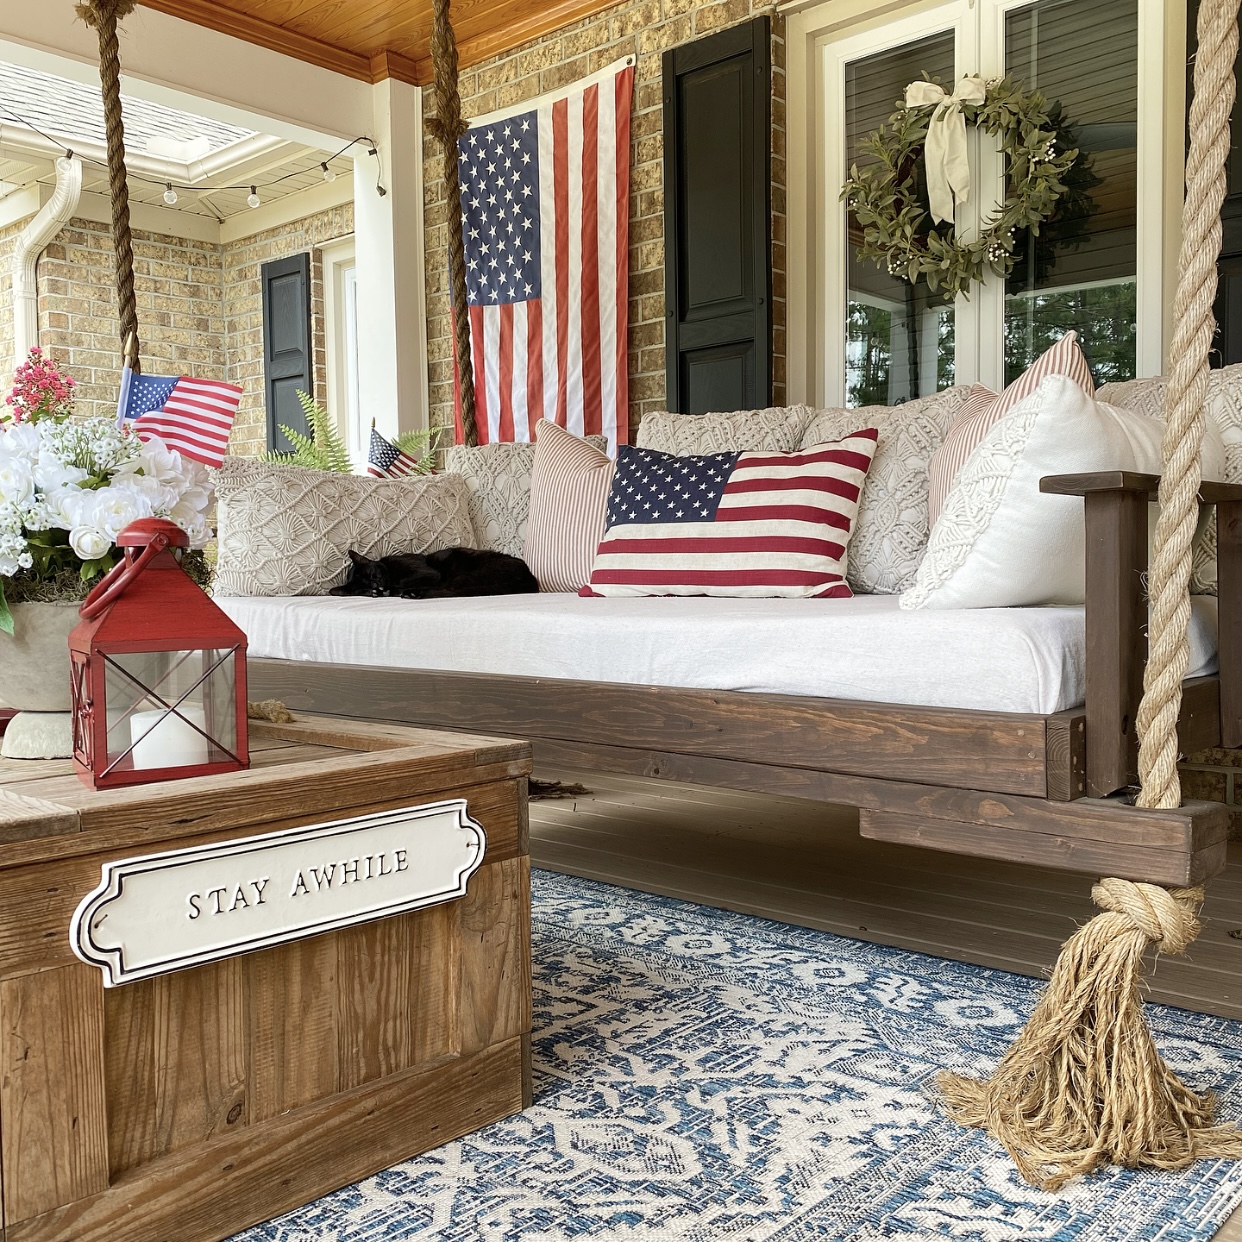 The front porch bed swing decorated with an American flag pillow. On the coffee table is a red lantern and a white floral arrangement in a concrete pedestal bowl. Behind the swing is an American flag hanging on the wall.